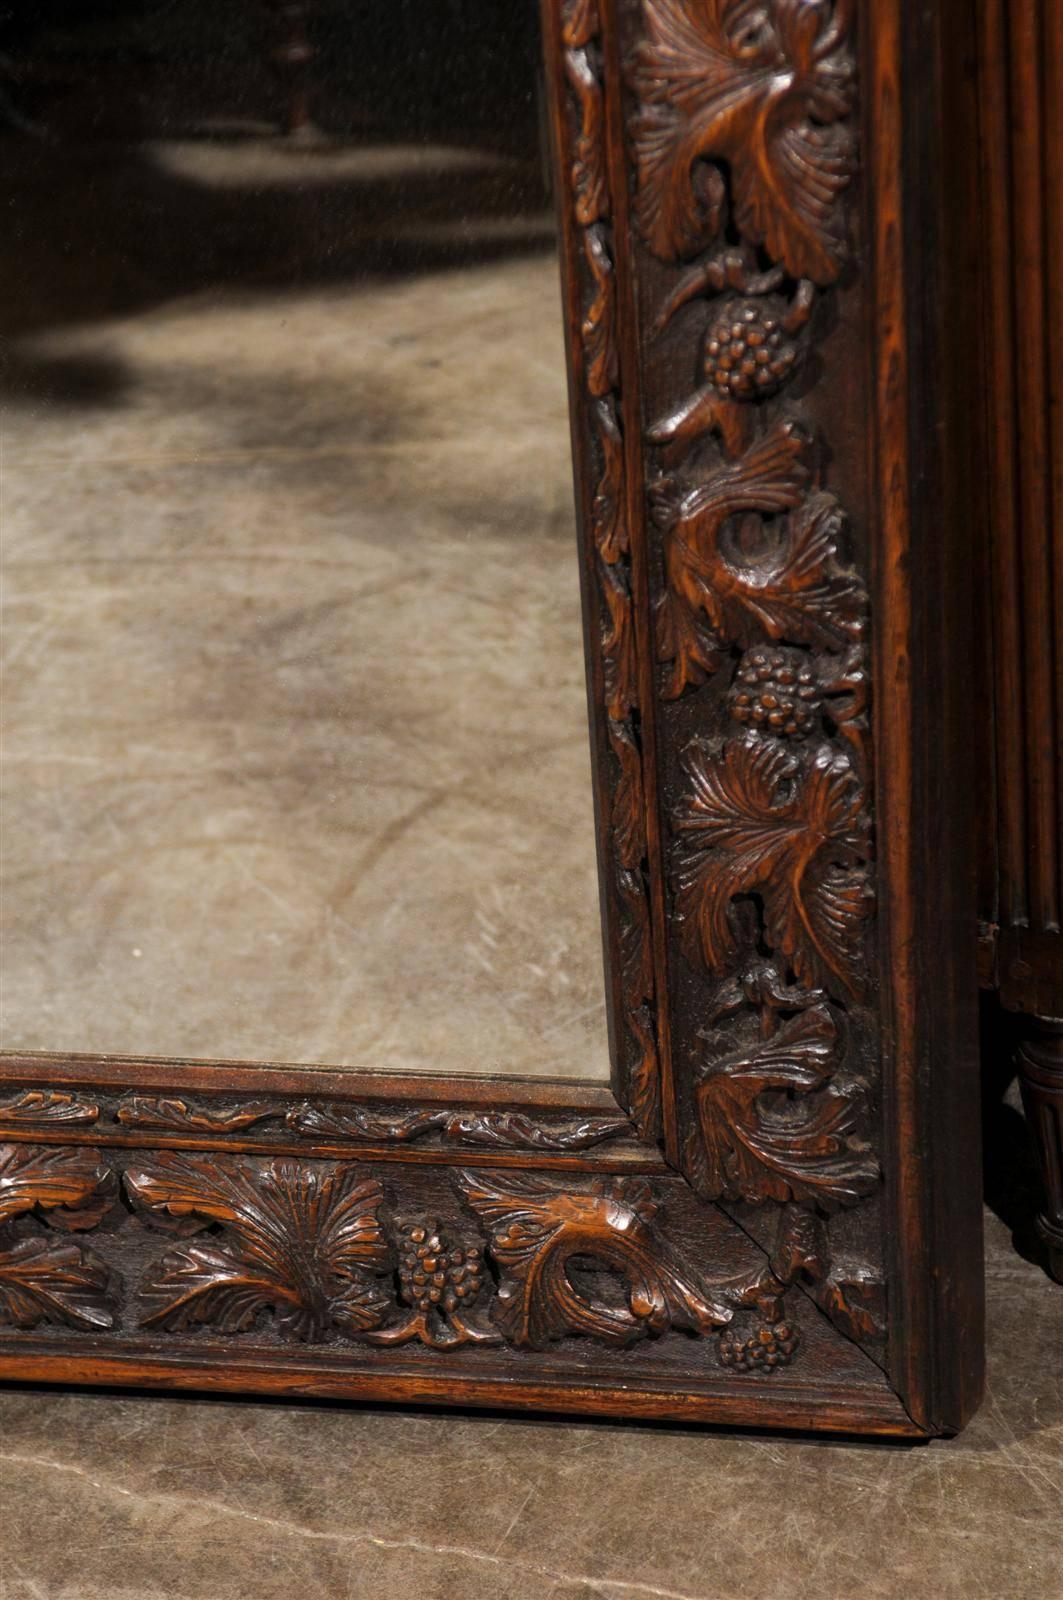 19th Century German Black Forest Carved Mirror with Foliage Motifs from the Late 19th Century